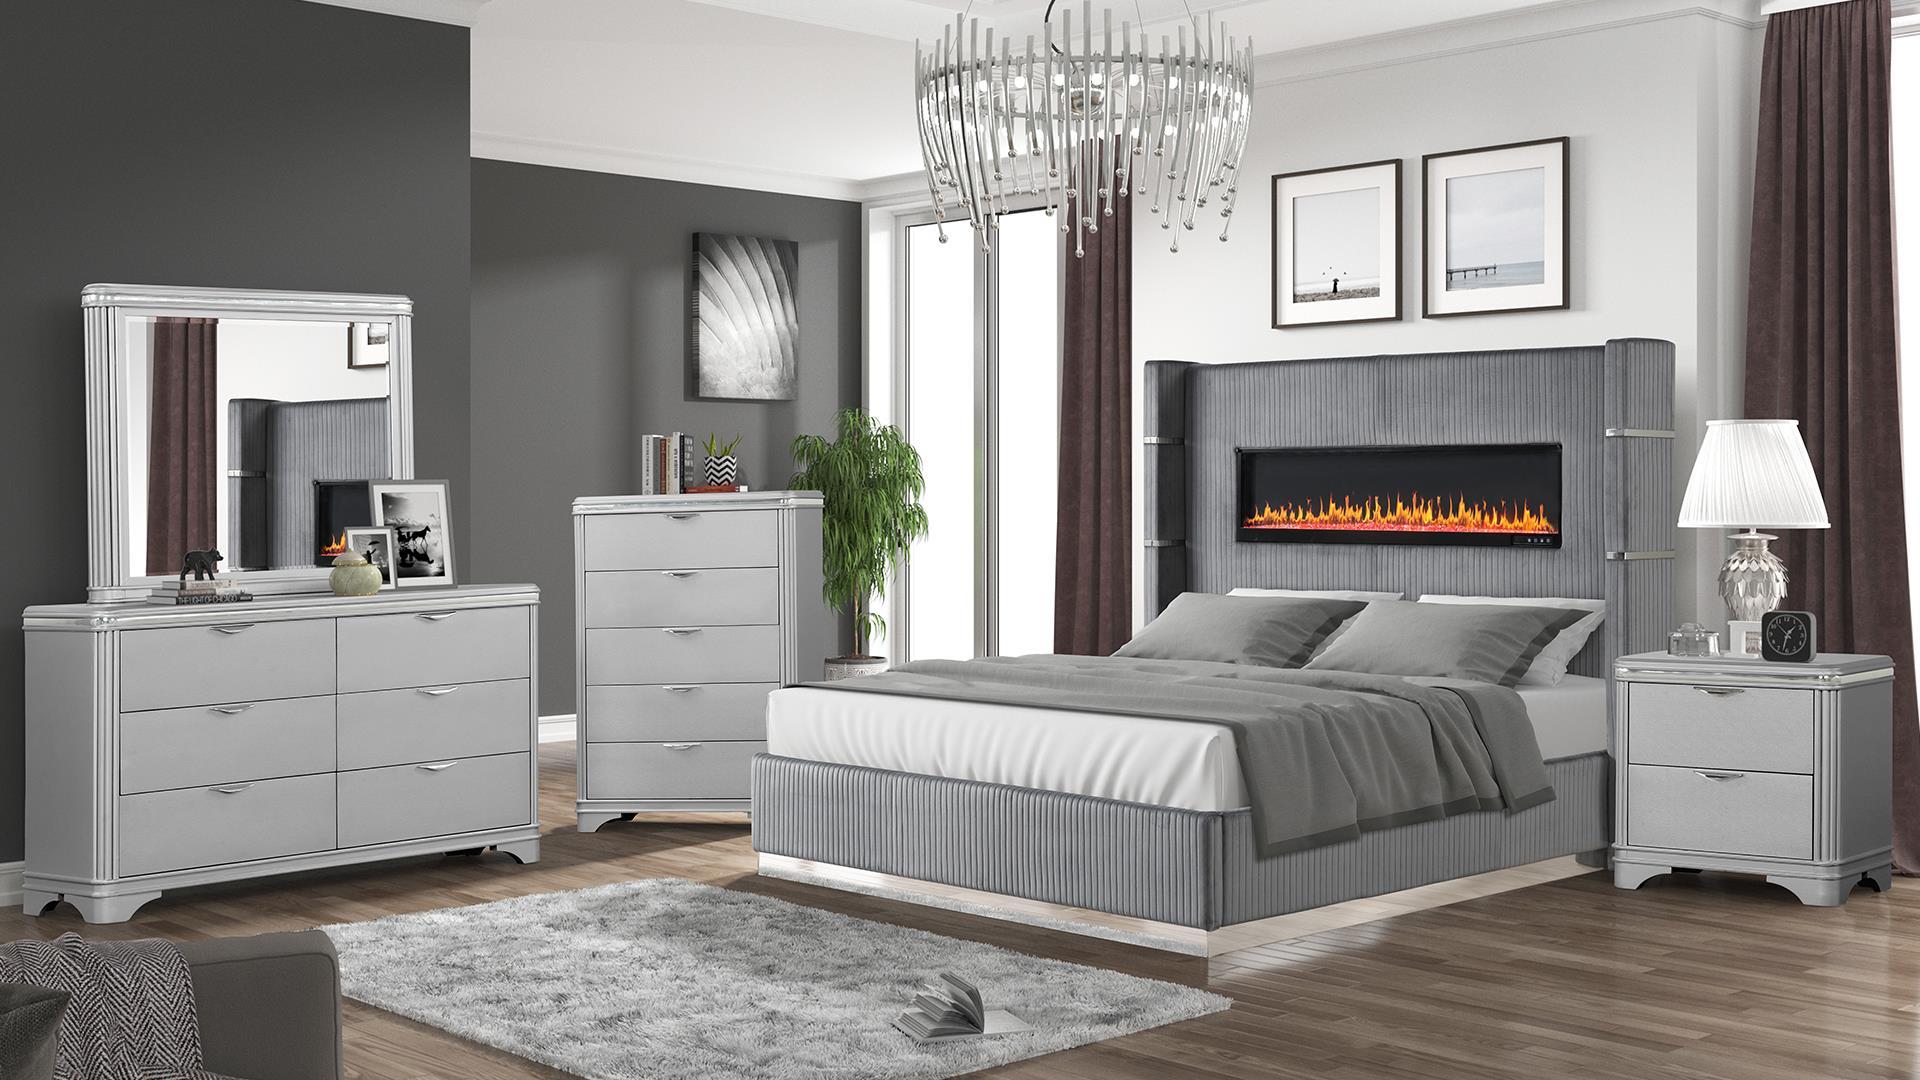 

    
Glam Gray King Bedroom Set 4Pcs LIZELLE Galaxy Home Contemporary Luxury
